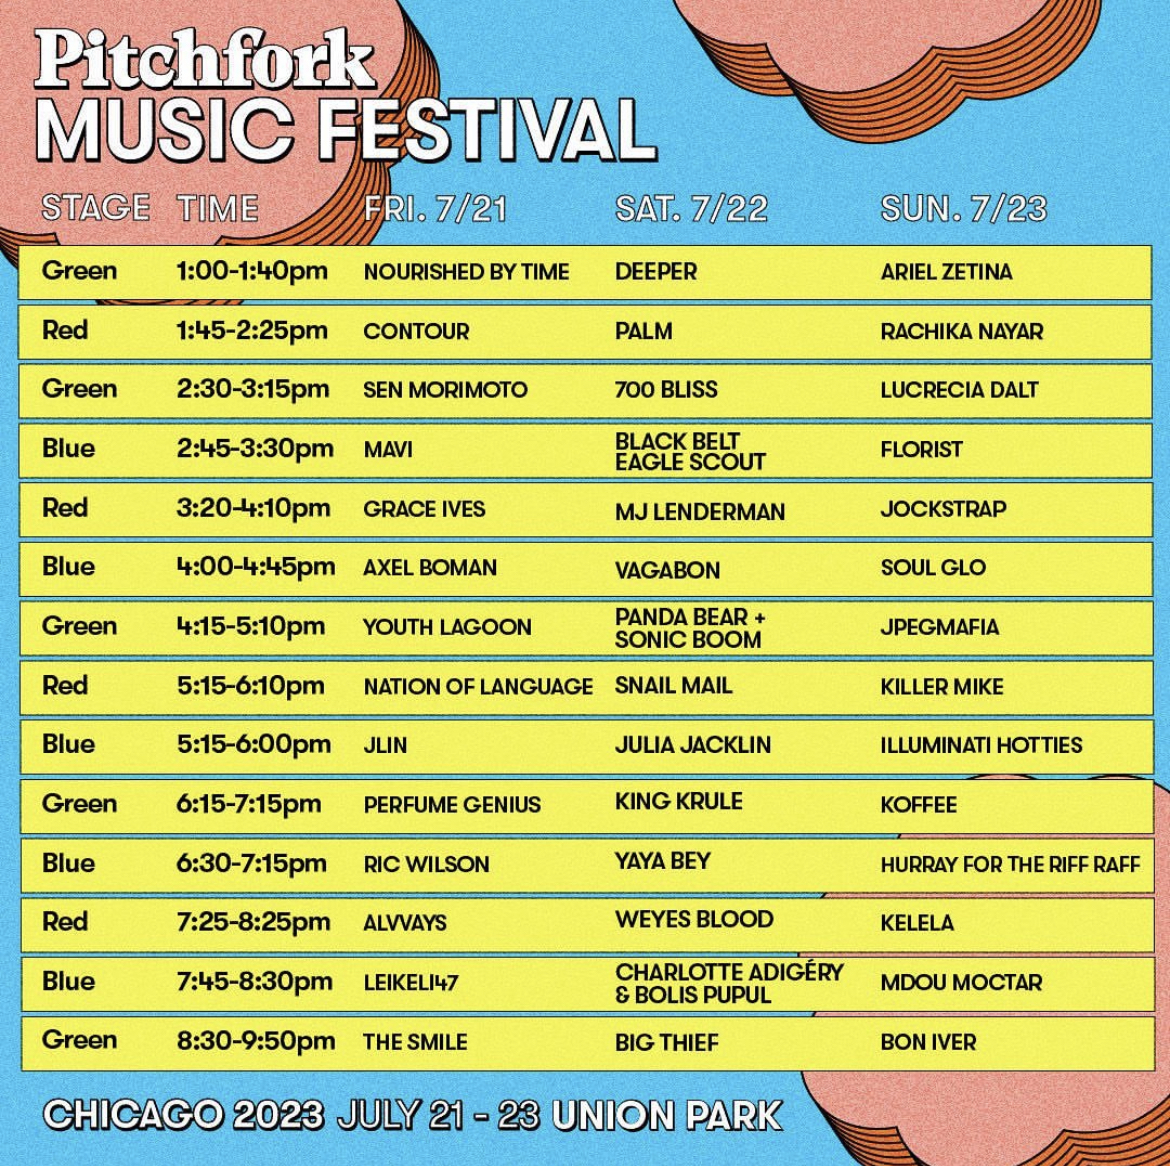 Graphic Courtesy of Pitchfork Music Festival